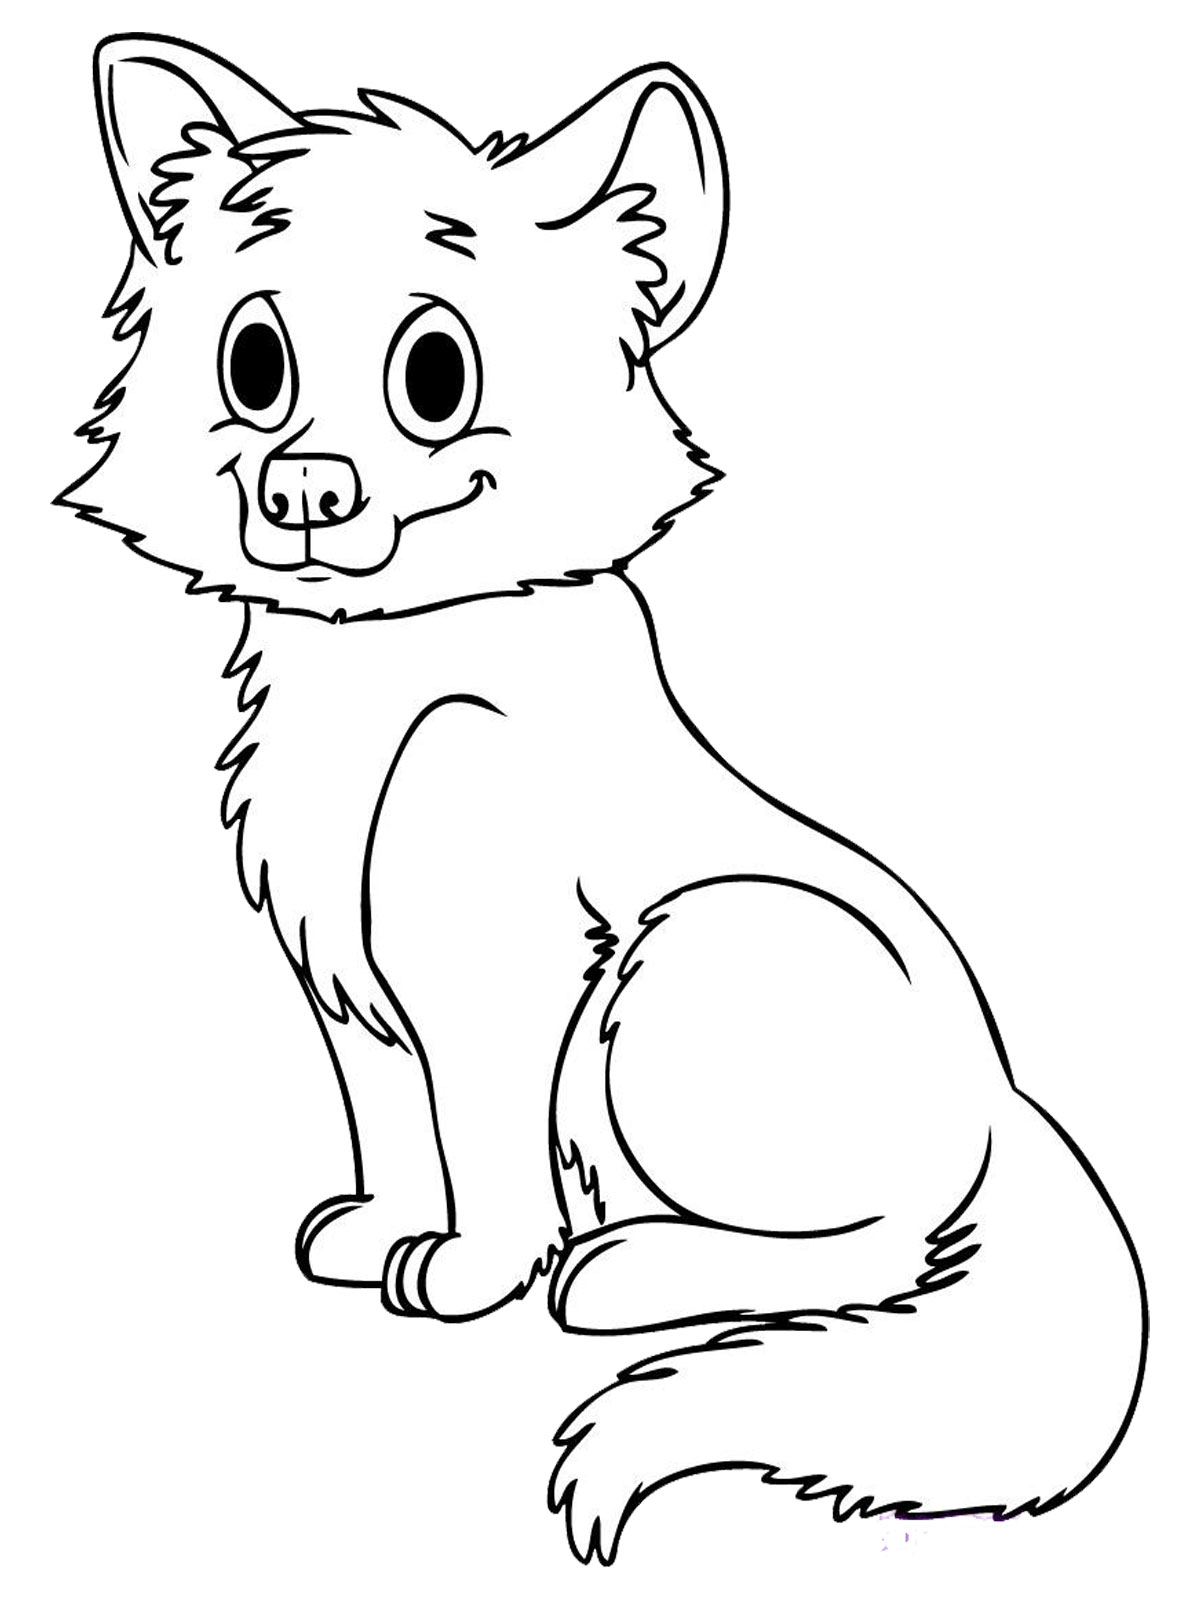 cub scout coloring pages wolf